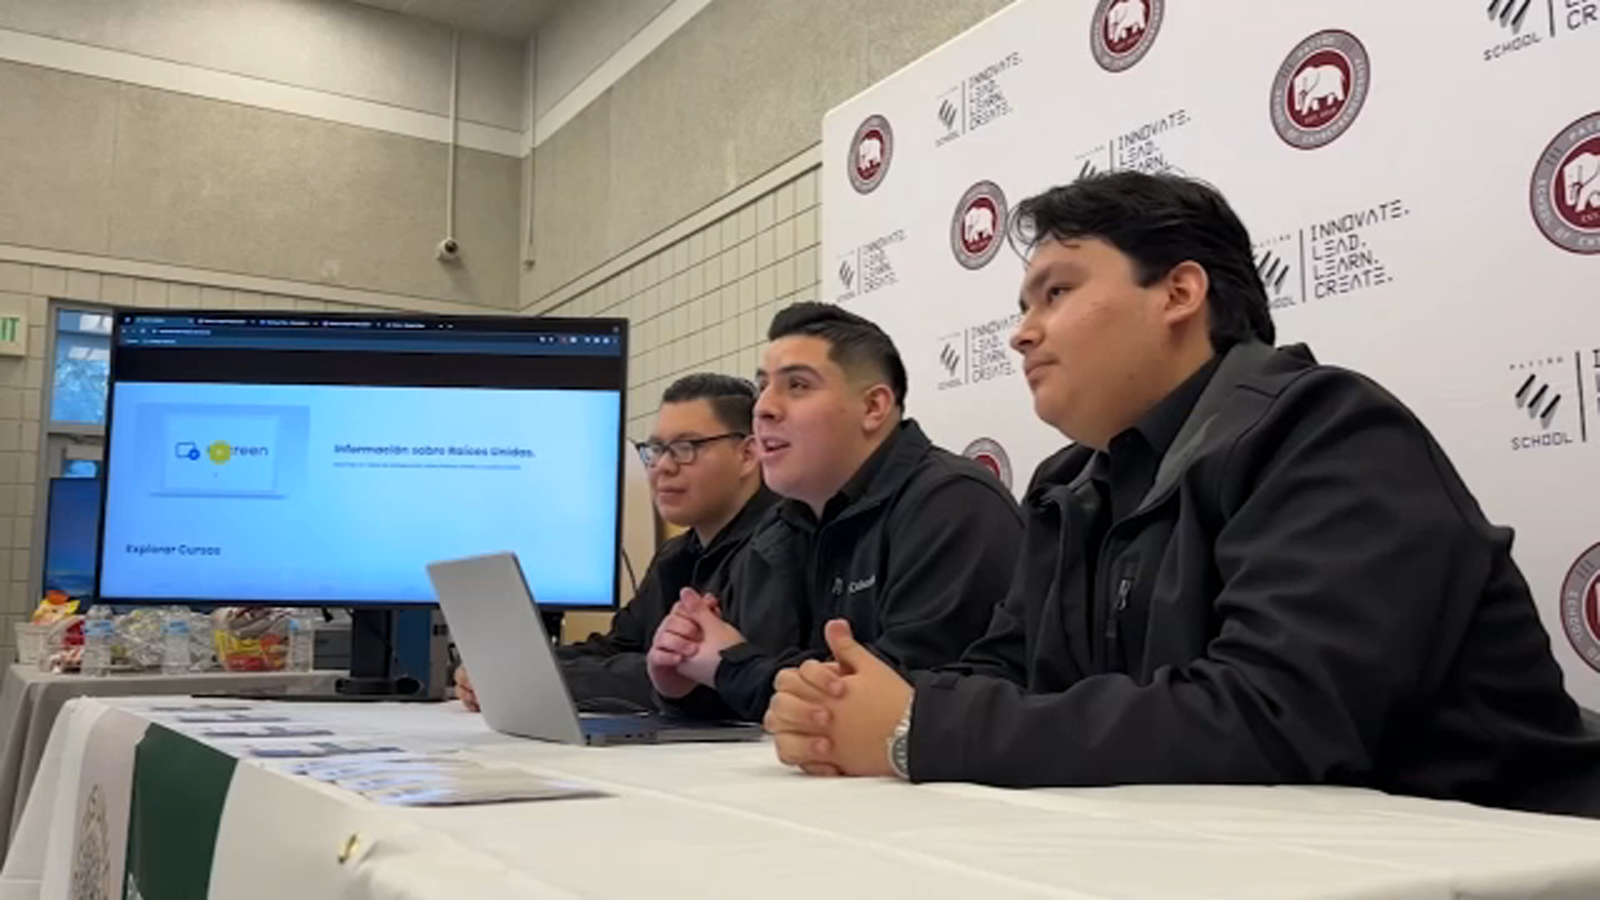 Fresno students pitch ideas to venture capitalists from Bloomberg Beta [Video]